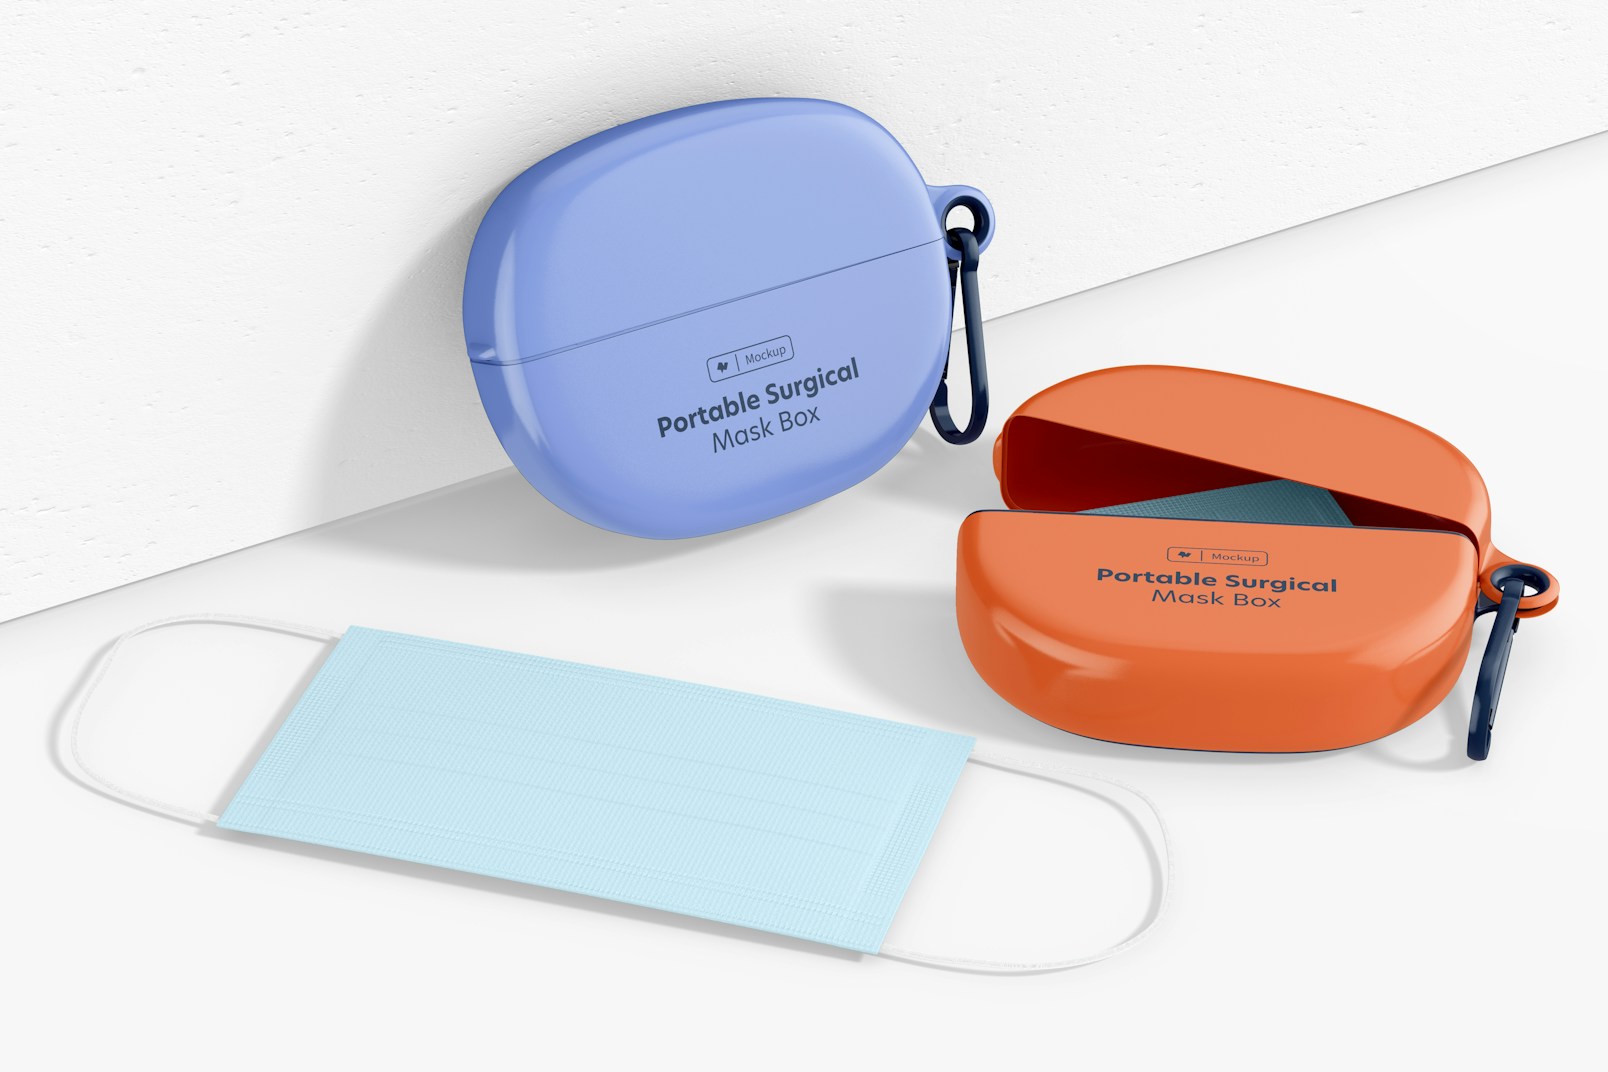 Portable Surgical Mask Box Mockup, Perspective